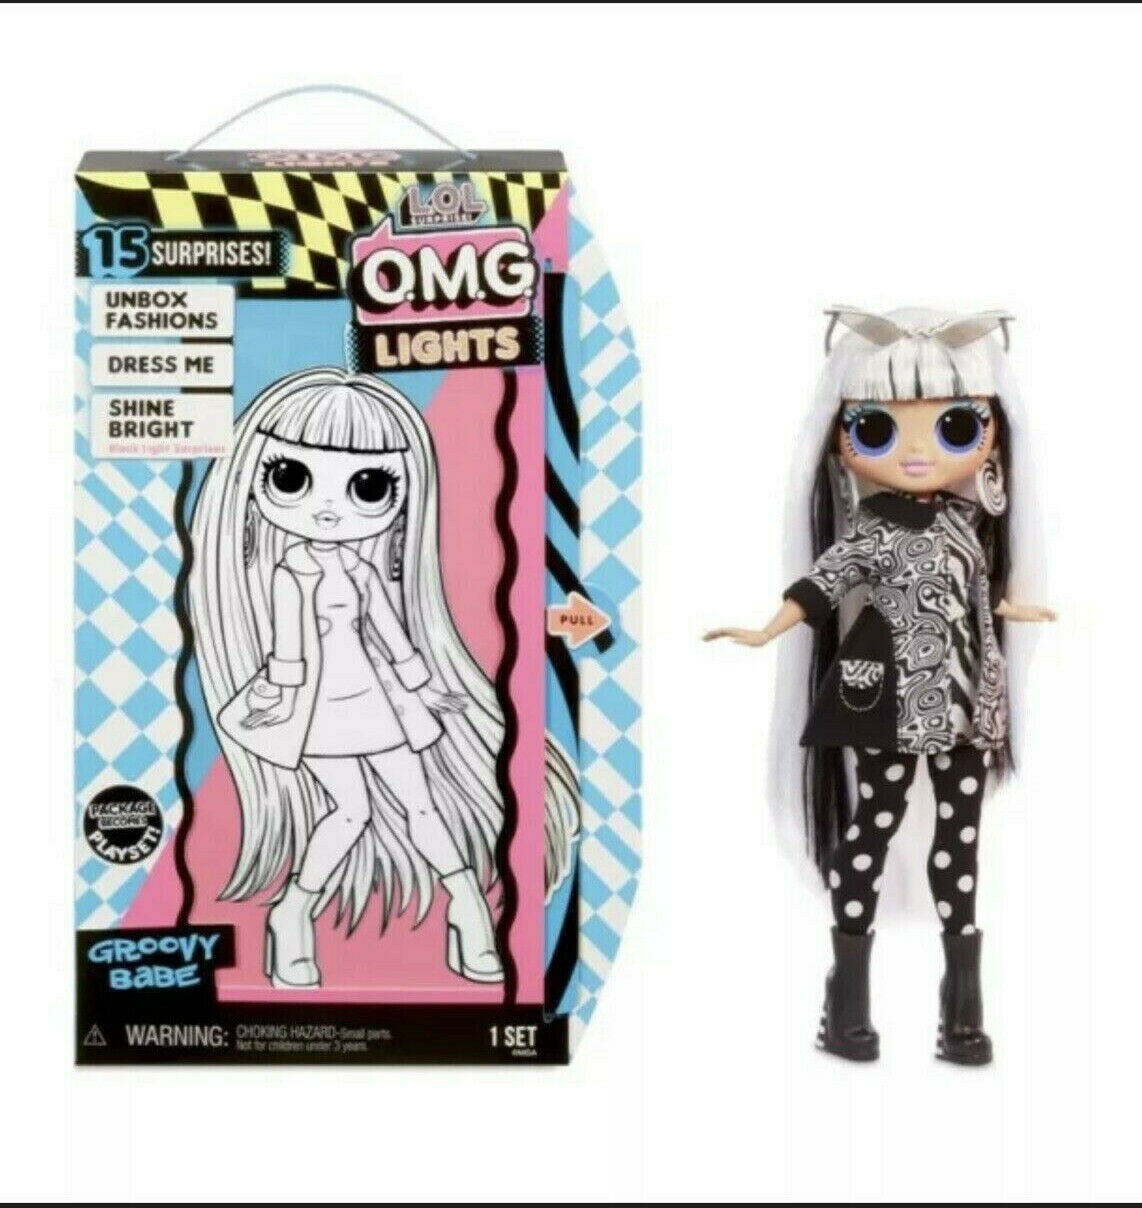 LOL Surprise OMG Lights Groovy Babe Fashion Doll with 15 Surprises